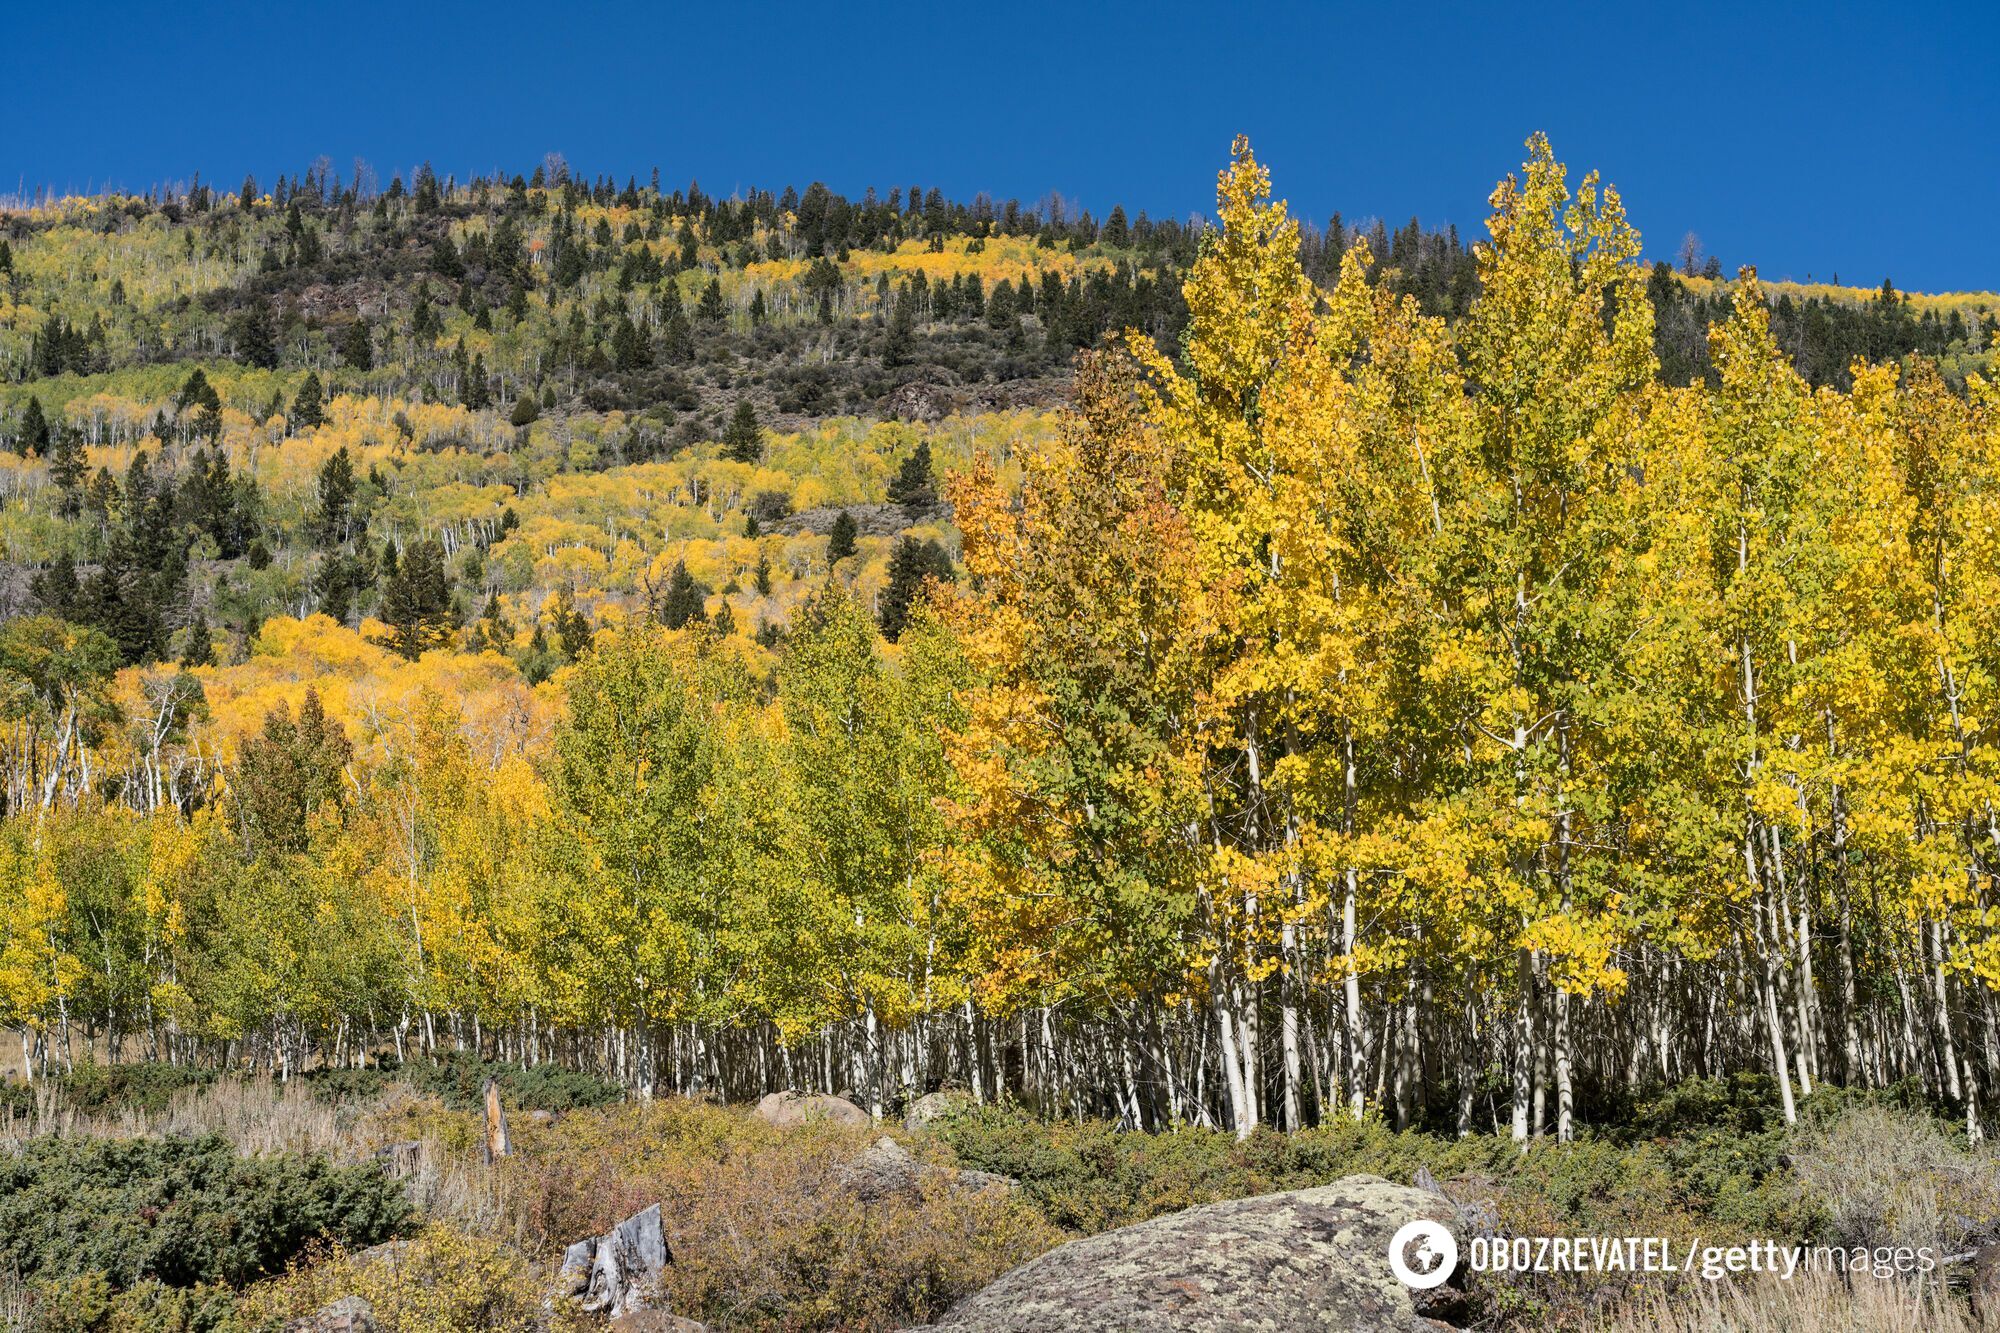 ''Utah's Pando is the largest organism on Earth